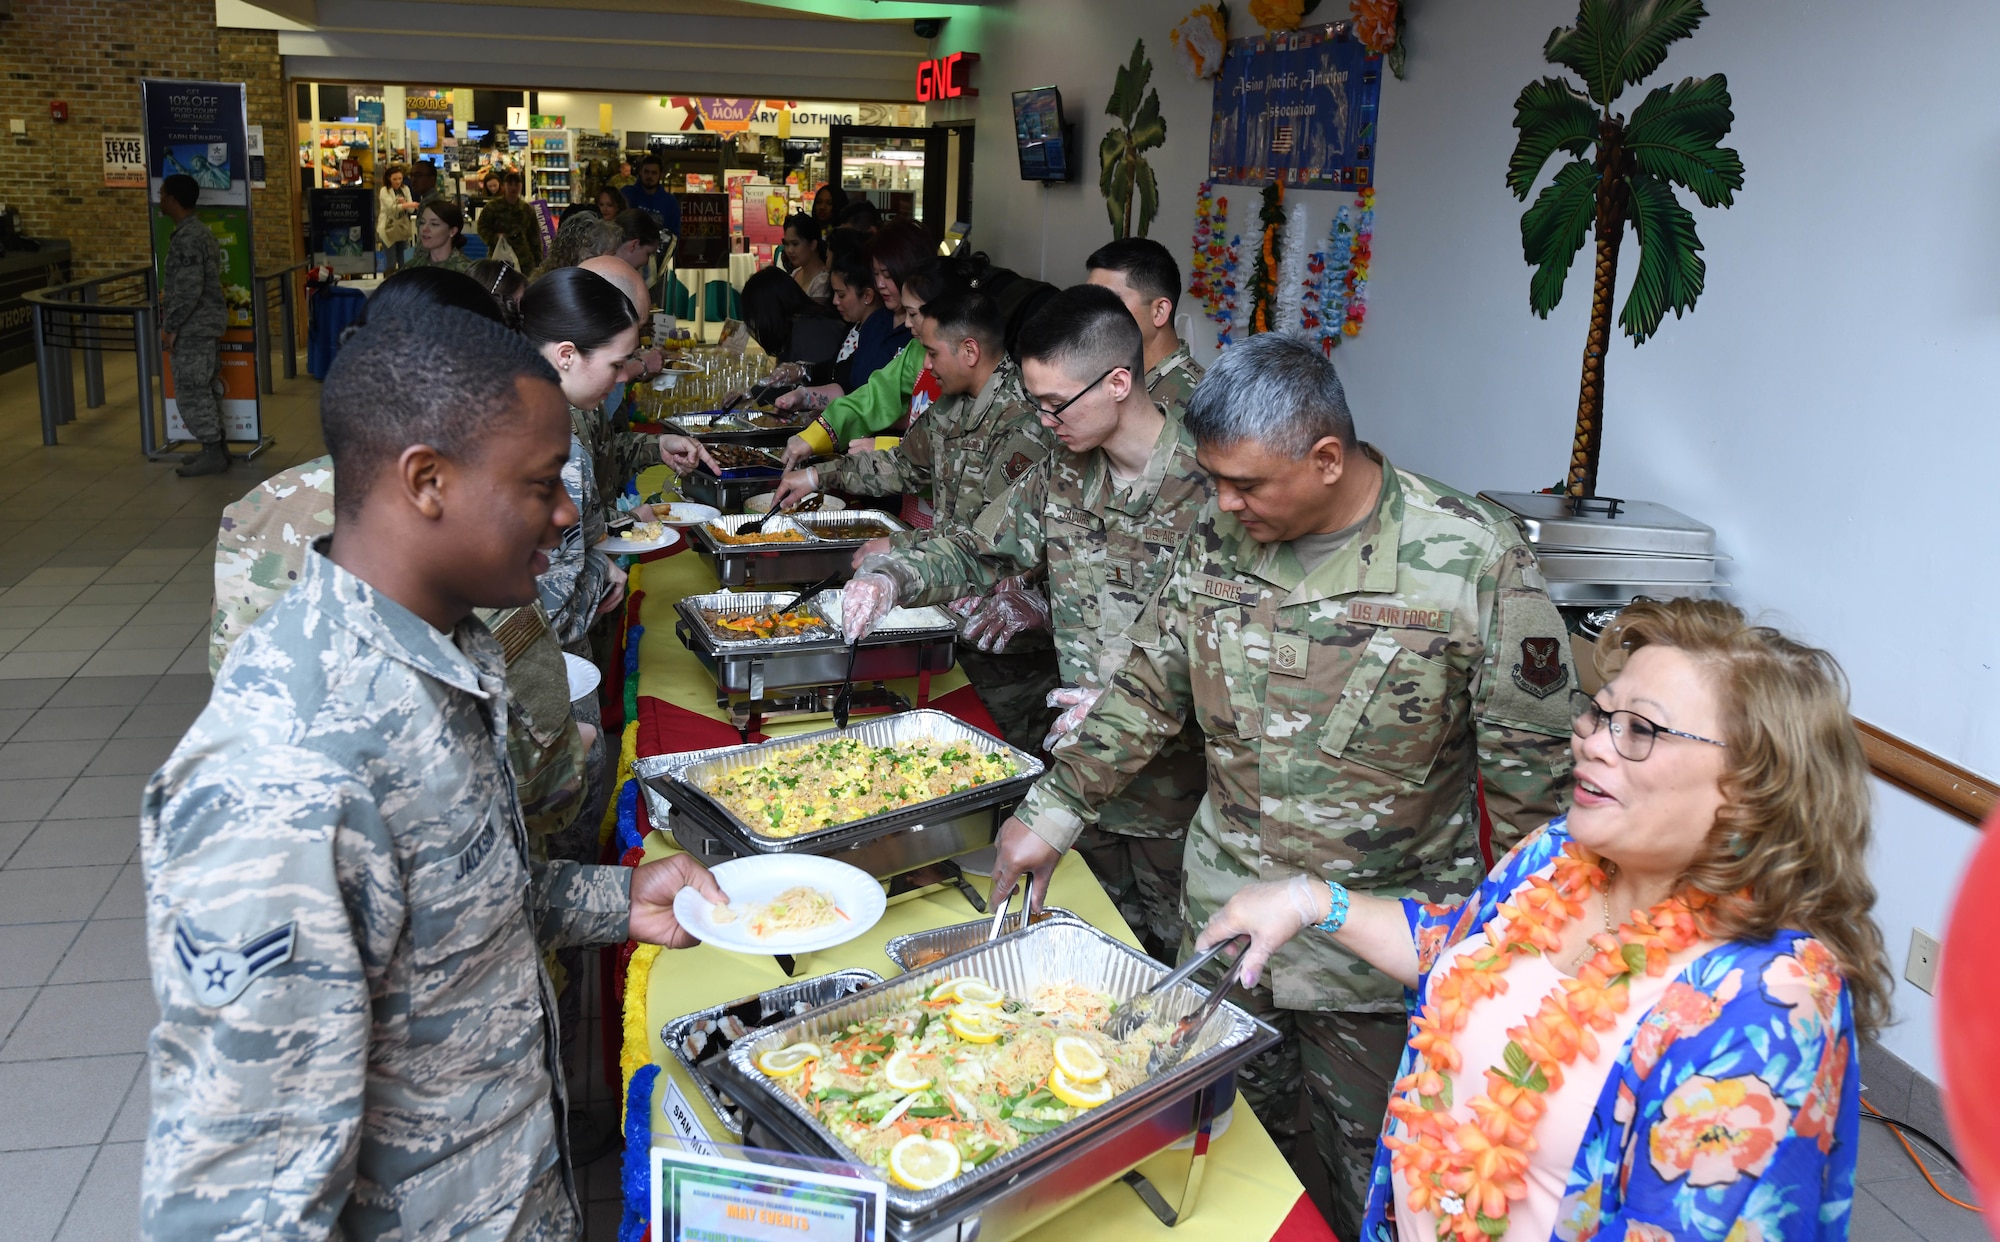 Airmen and their families line up to eat Asian and Pacific Islander influenced foods at Ellsworth Air Force Base, S.D., May 3, 2019. The Asian Pacific American Heritage Month celebration at The Exchange on base included unique foods, guest speakers and hula dancing. (U.S. Air Force photo by Senior Airman Thomas Karol)